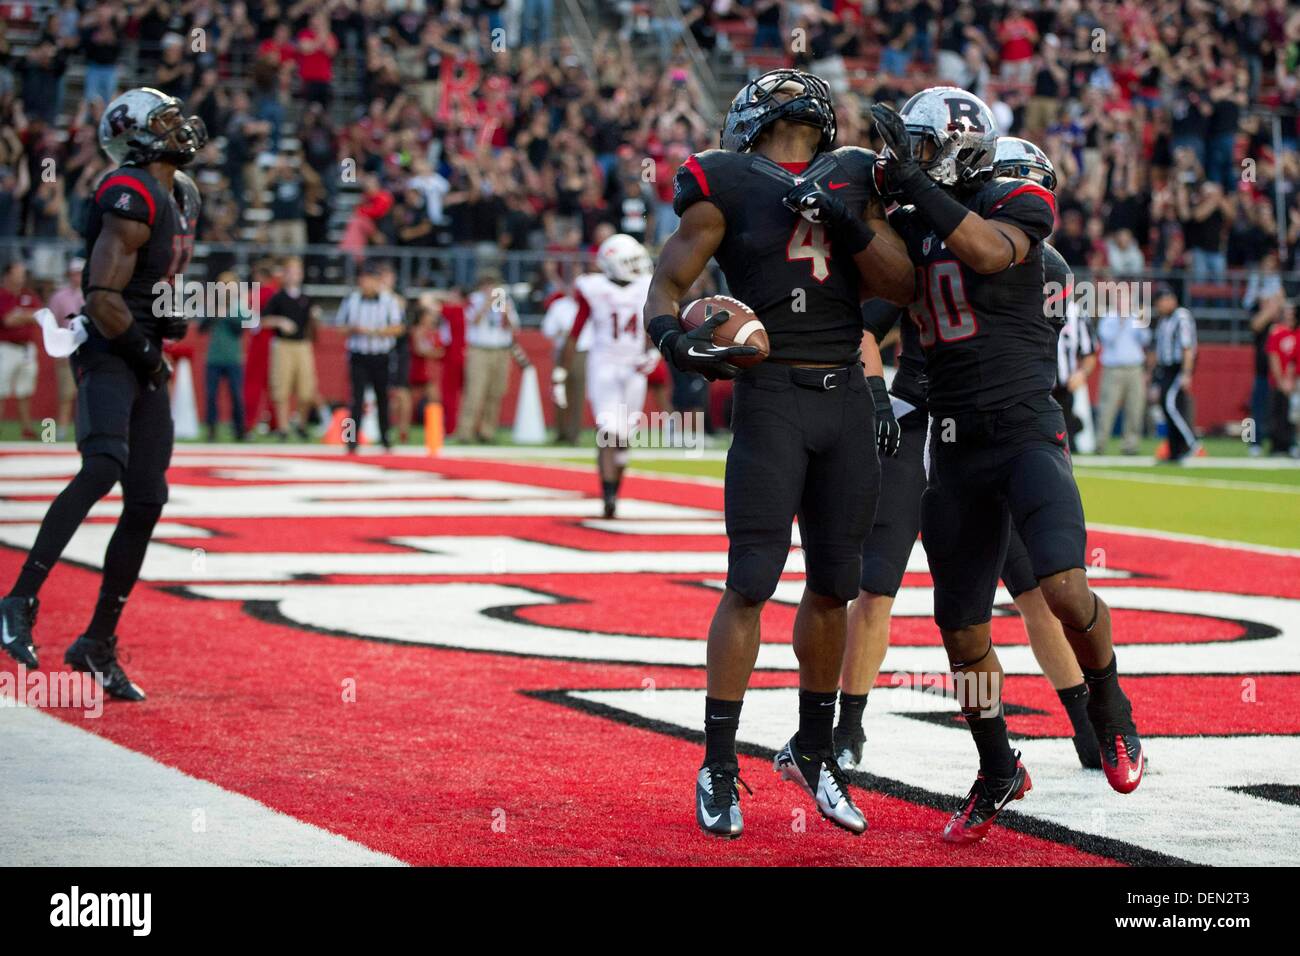 Piscataway, New Jersey, USA. 21st Sep, 2013. September 21, 2013: Rutgers Scarlet Knights wide receiver Leonte Carroo (4) celebrates after scoring a touchdown during the game between Arkansas Razorbacks and Rutgers Scarlet Knights at Highpoint Solutions Stadium in Piscataway, NJ. Rutgers Scarlet Knights defeated The Arkansas Razorbacks 28-24. Credit:  csm/Alamy Live News Stock Photo